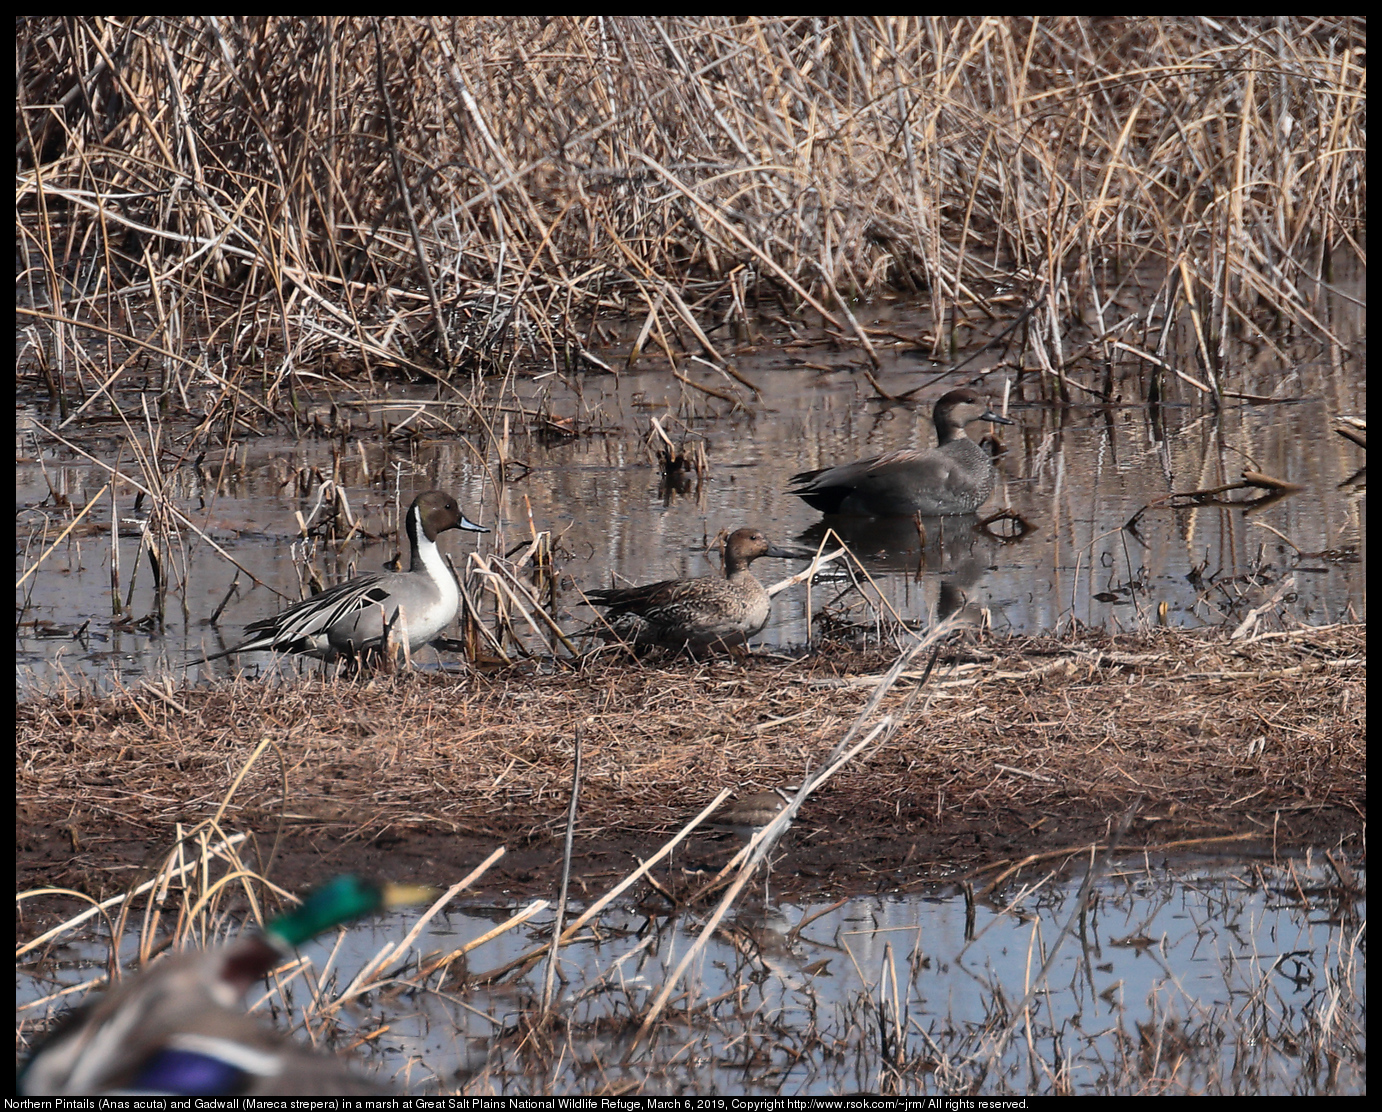 Northern Pintails (Anas acuta) and Gadwall (Mareca strepera) in a marsh at Great Salt Plains National Wildlife Refuge, March 6, 2019